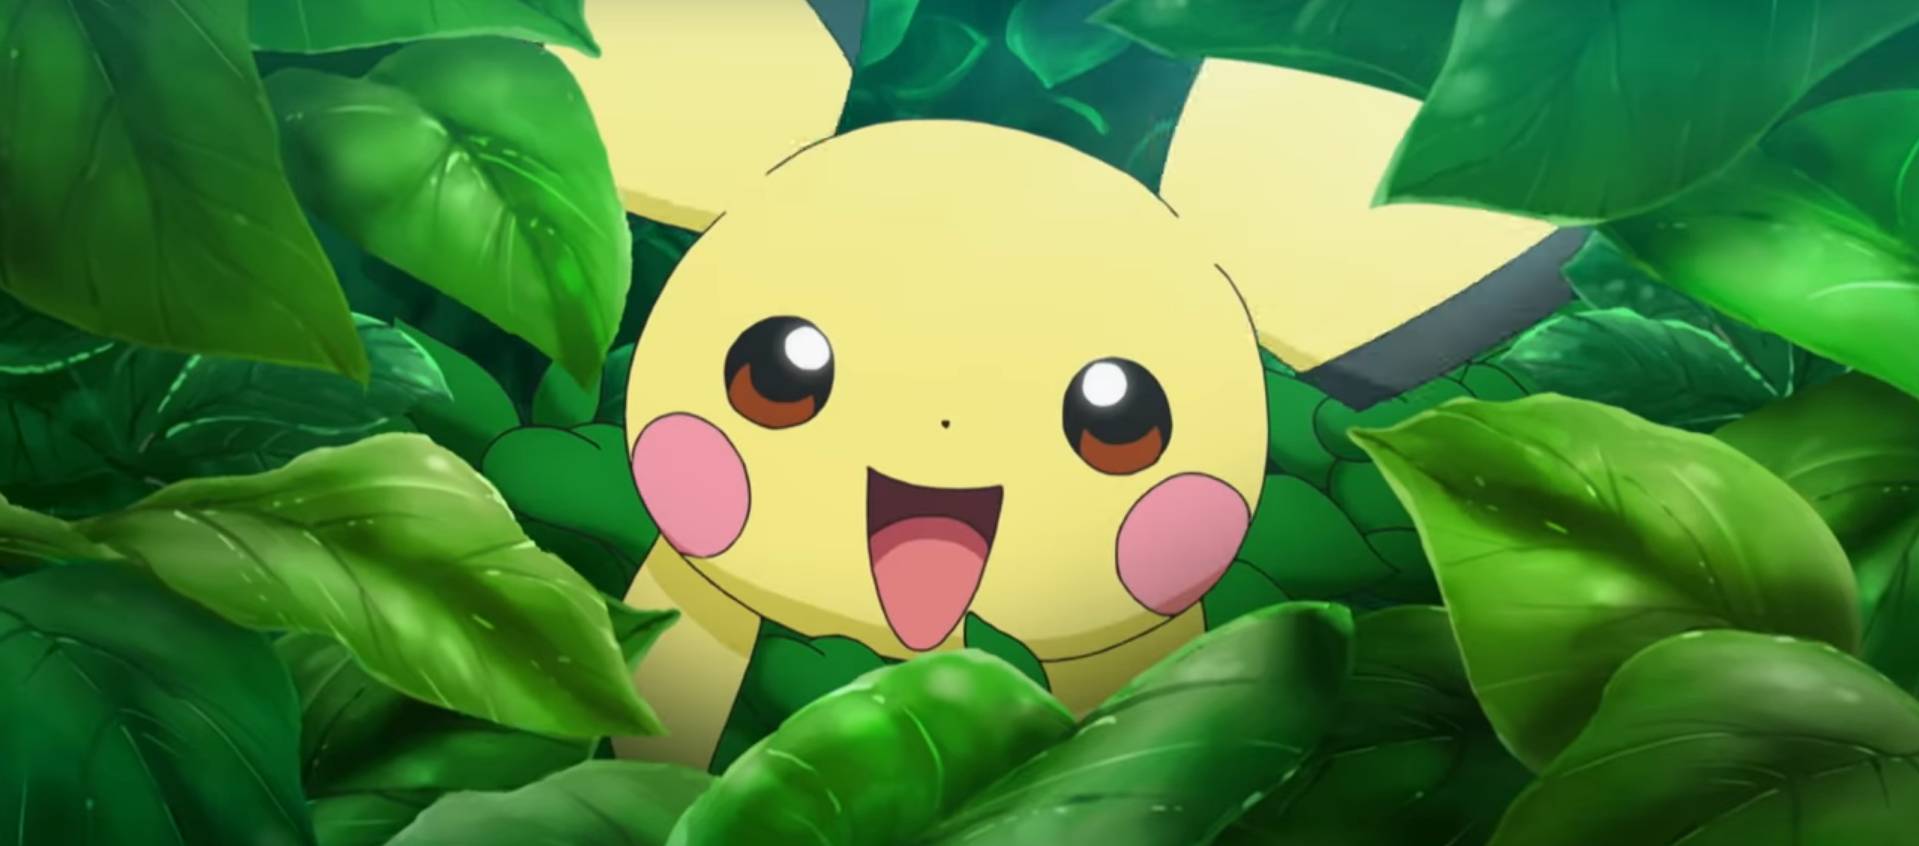 New Pokémon Anime Will Show Pikachu As A Young Pichu For First Time